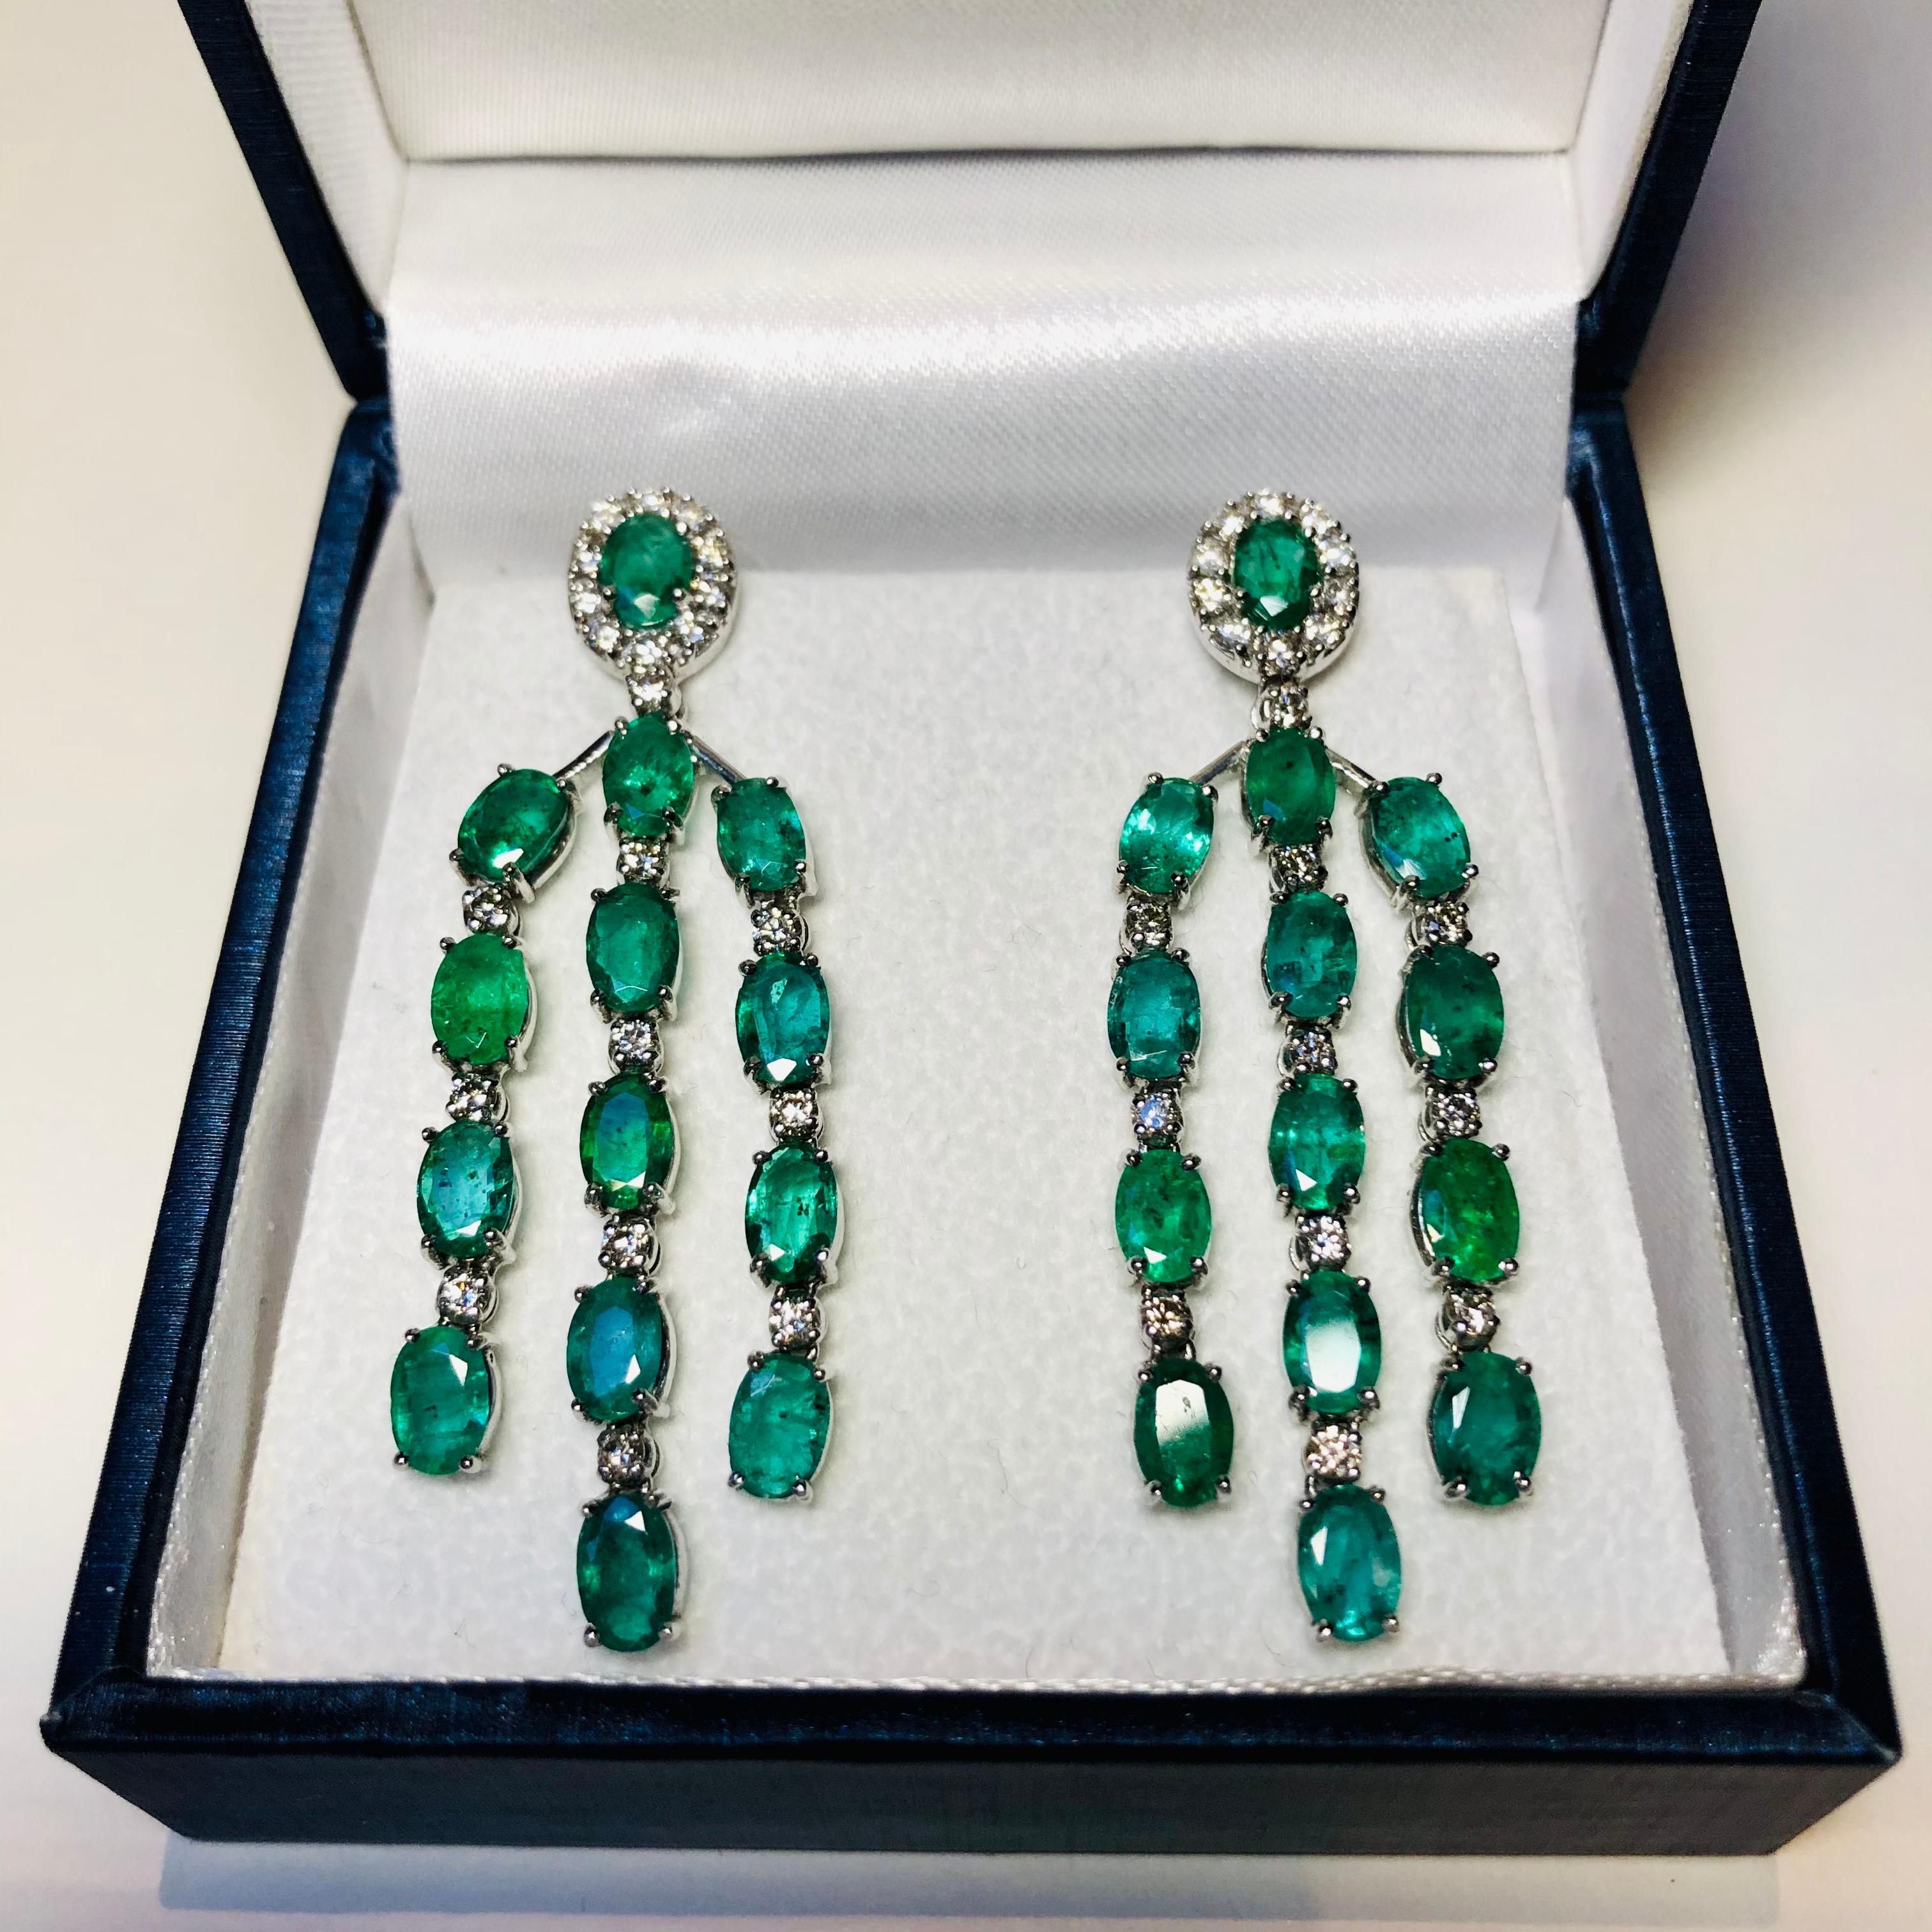 Emerald and Diamond chandelier earrings set in 18 carat white gold. Boasting 7.8 carats of oval cut emeralds and 1.60 carats of brilliant cut diamonds in an articulated white gold setting. Elegant and refined these earrings are Red Carpet worthy but